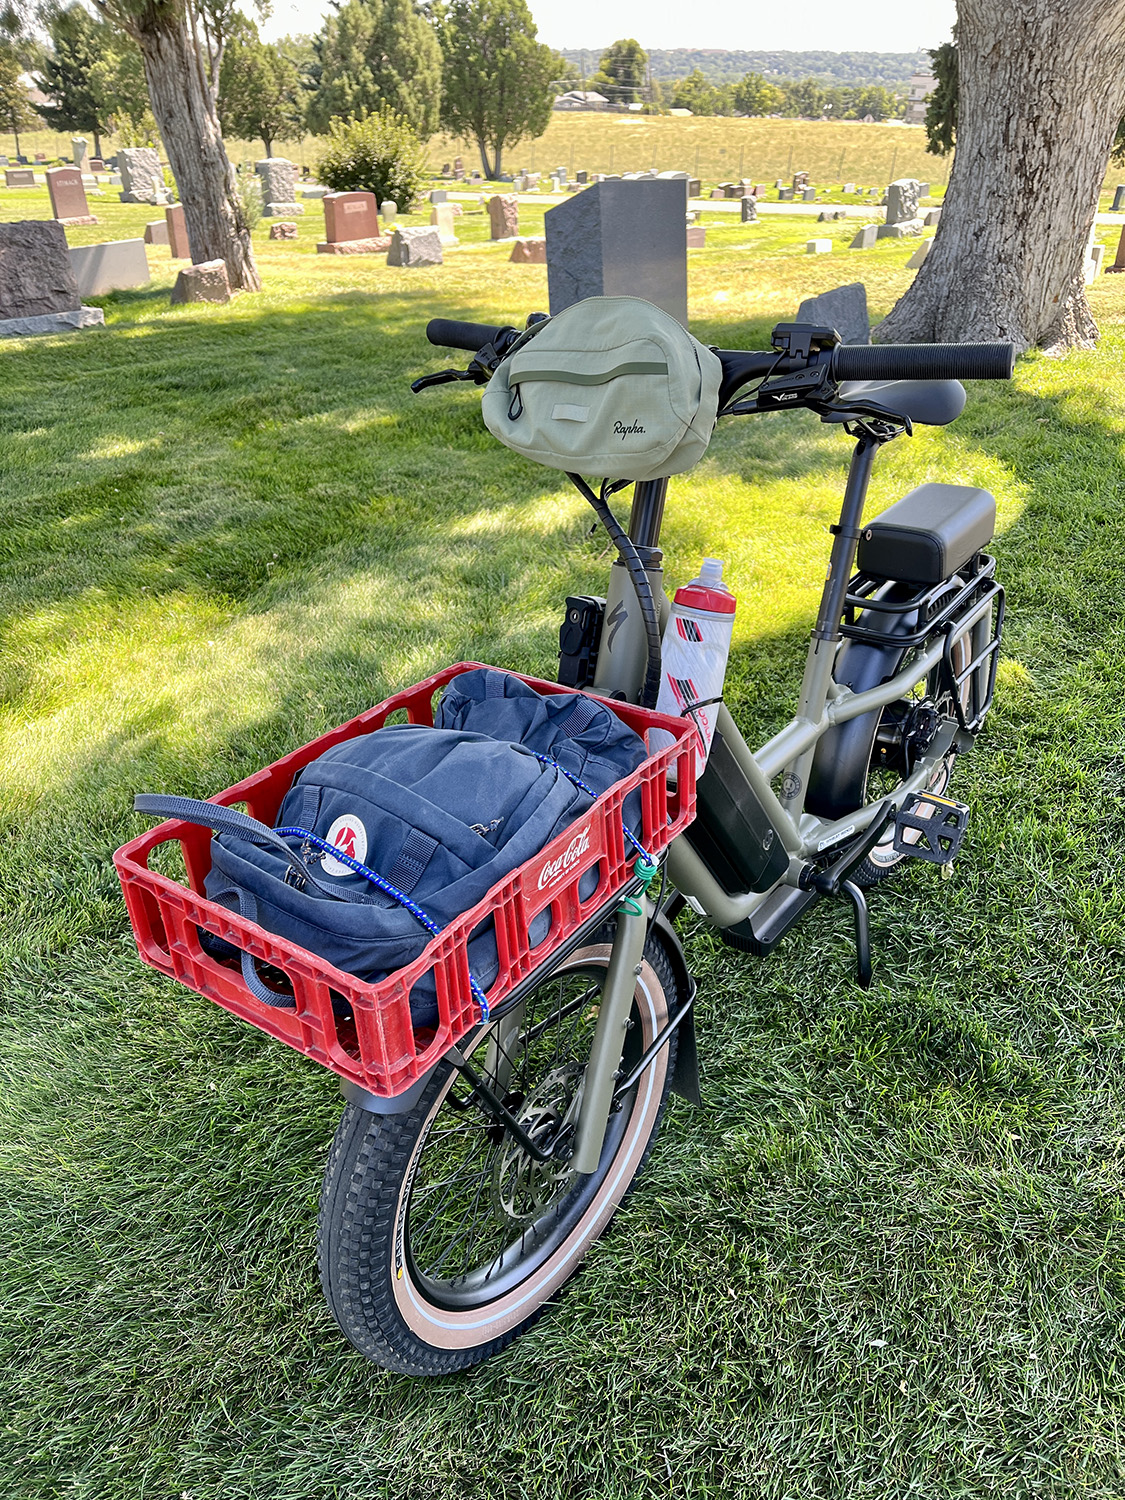 Globe Haul ST bike with a red crate and blue laptop bag in a cemetery